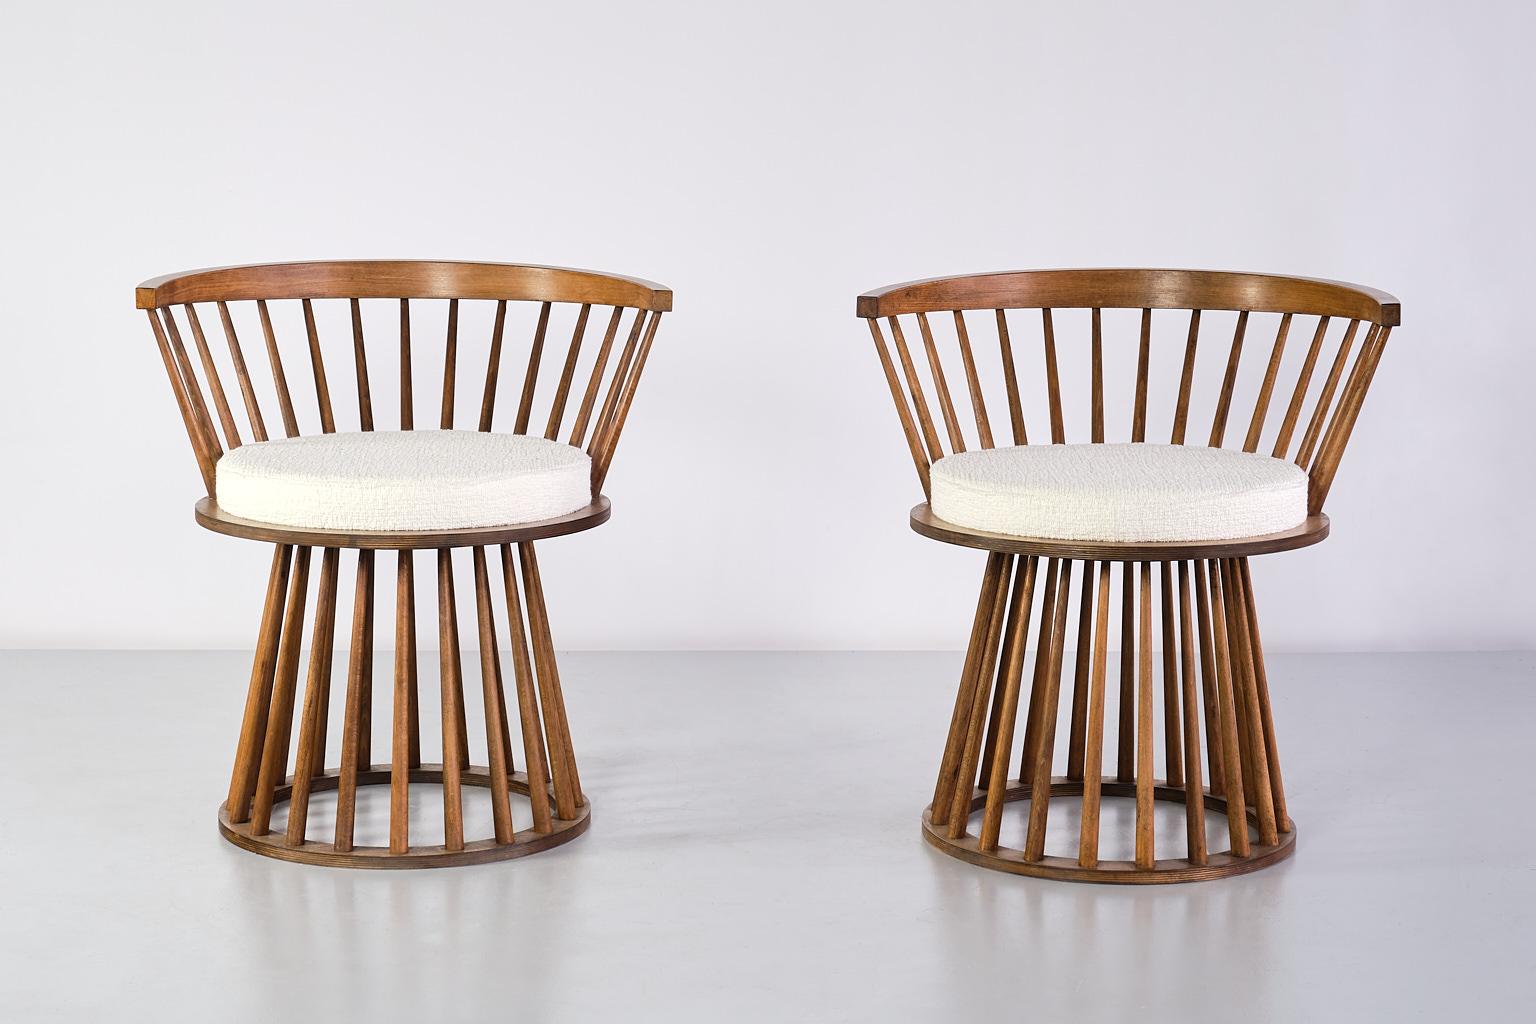 This striking pair of armchairs was produced in France in the late 1950s. The design is marked by the embracing, curved spindle back. The circular spindle base with the its upwards tapering wooden bars is giving the chairs a distinct and dynamic